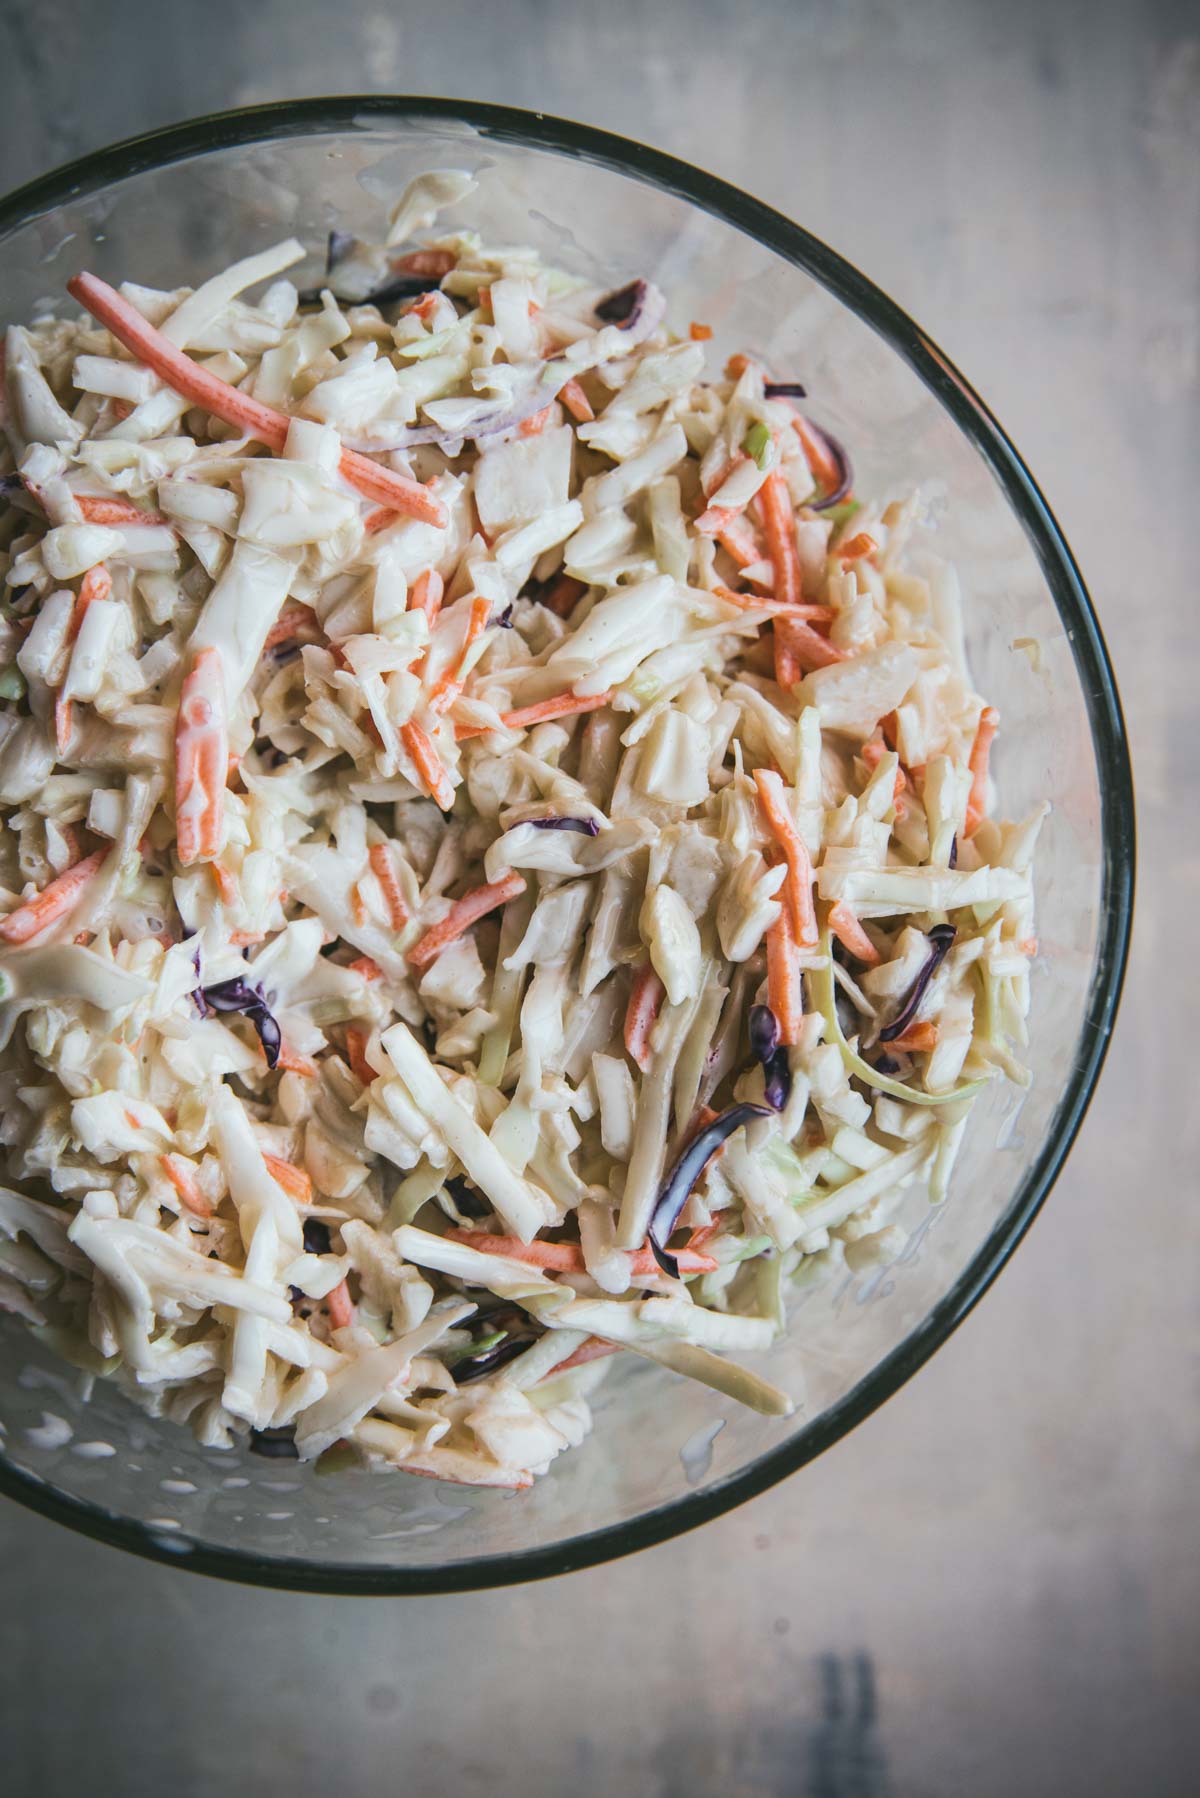 A glass bowl is filled with coleslaw. There is cabbage and carrots inside.